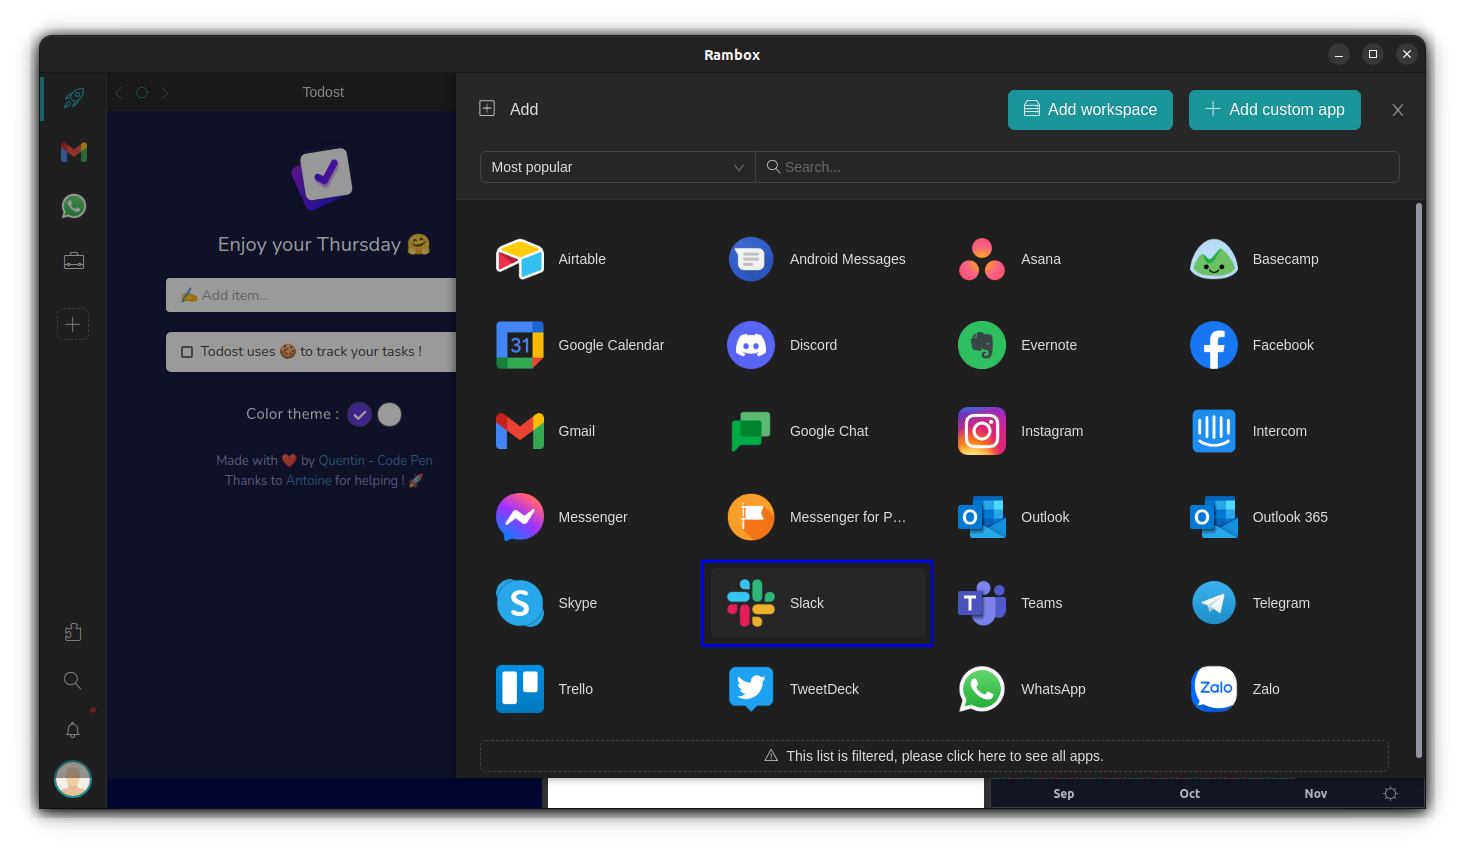 Slack application listed in Rambox application list